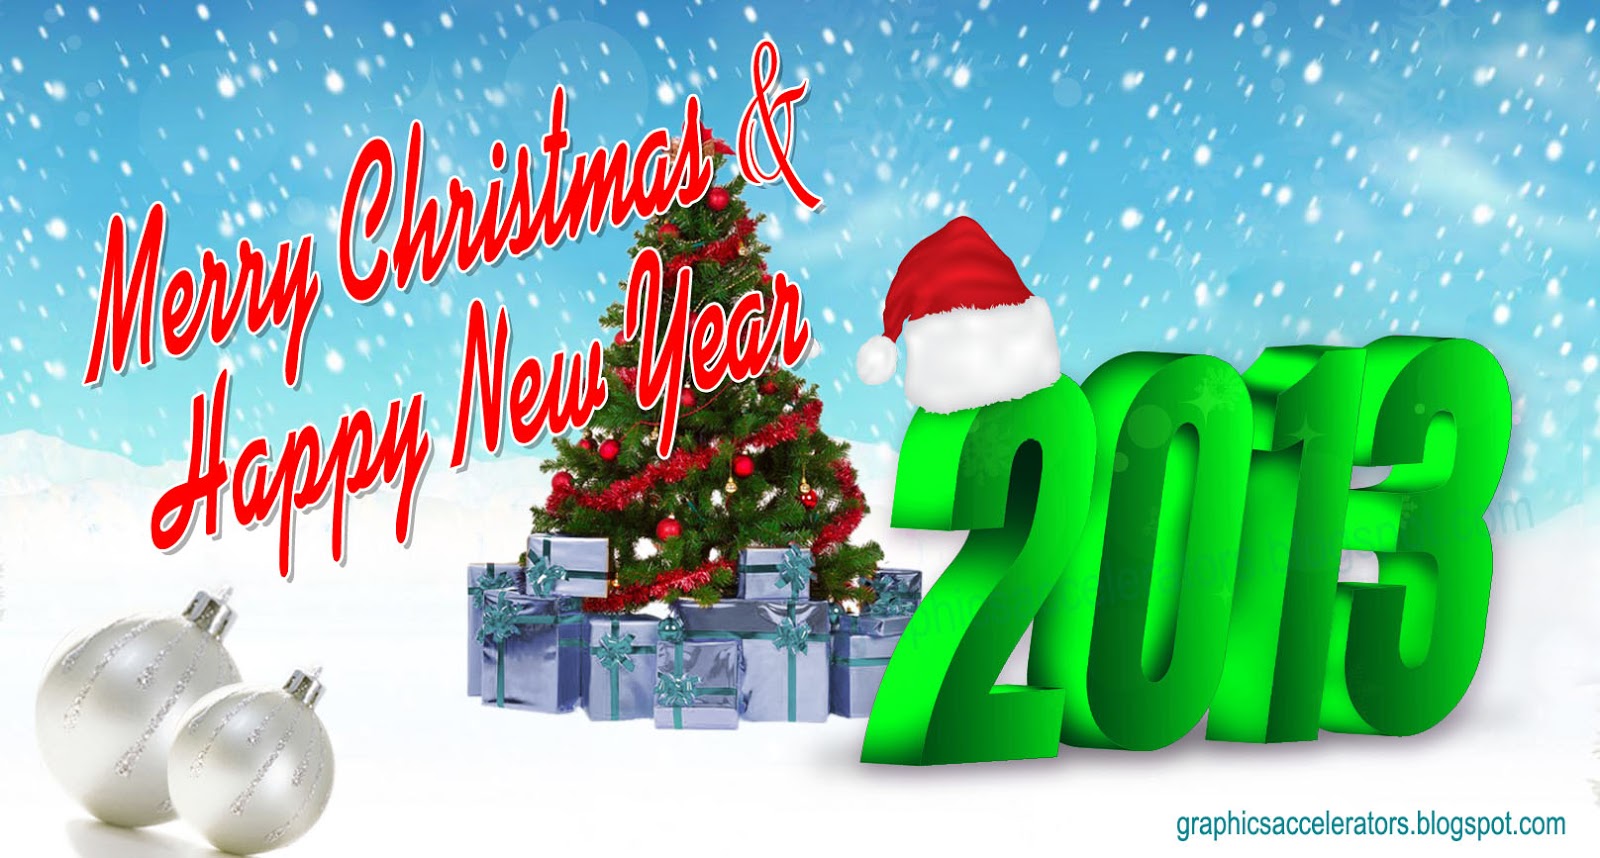 Merry Christmas and Happy New Year 2013 - 7587 - The Wondrous Pics